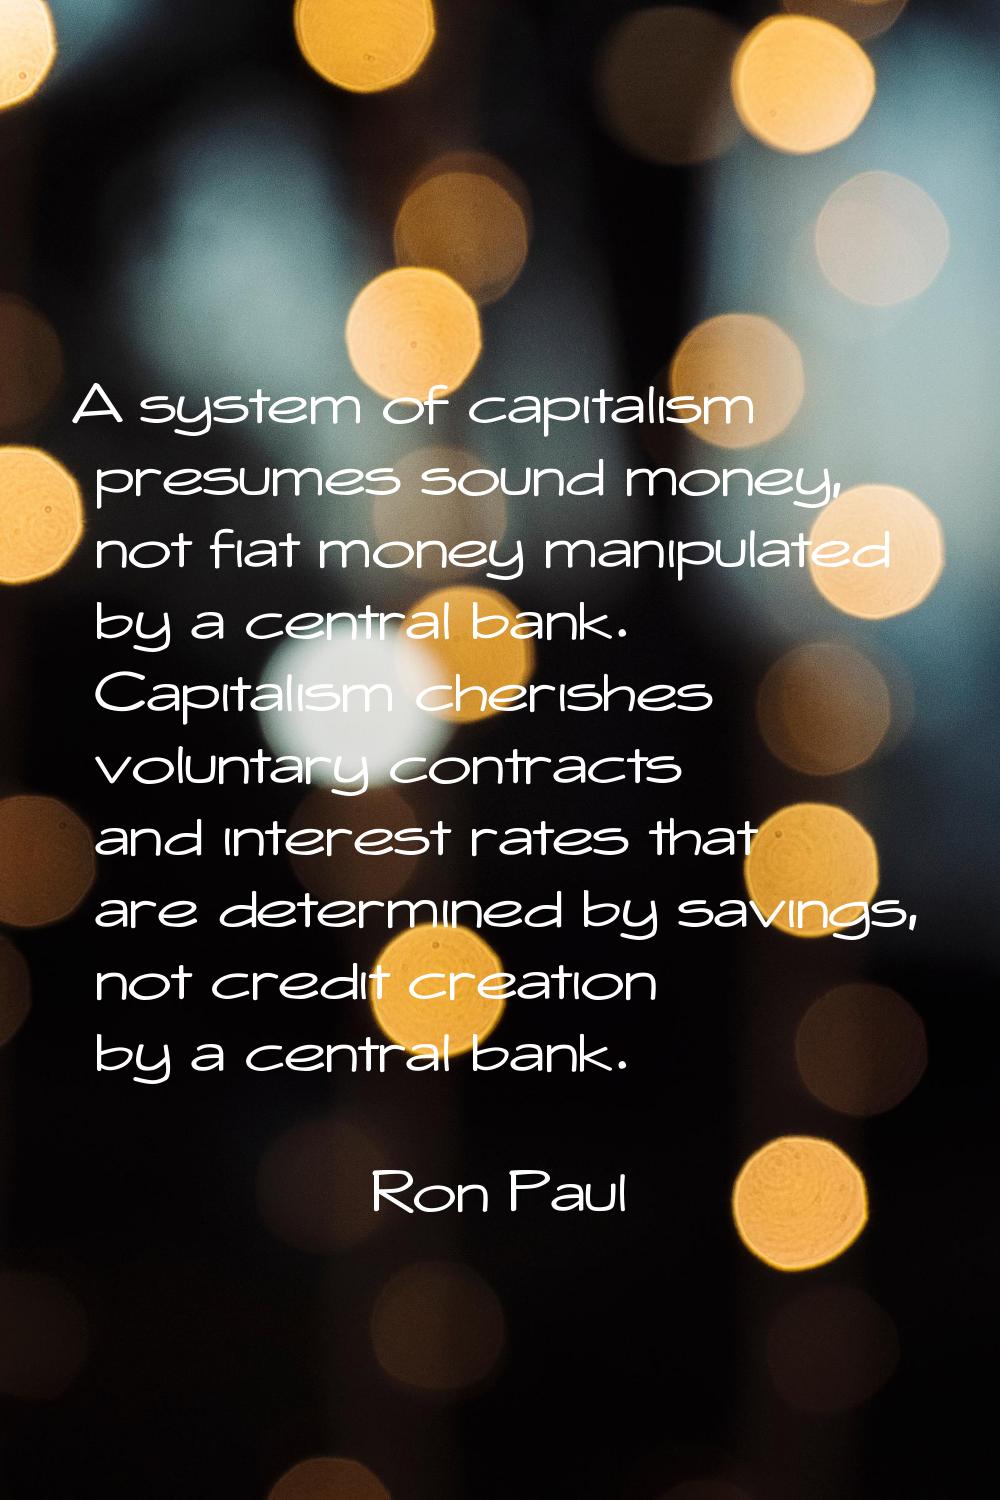 A system of capitalism presumes sound money, not fiat money manipulated by a central bank. Capitali